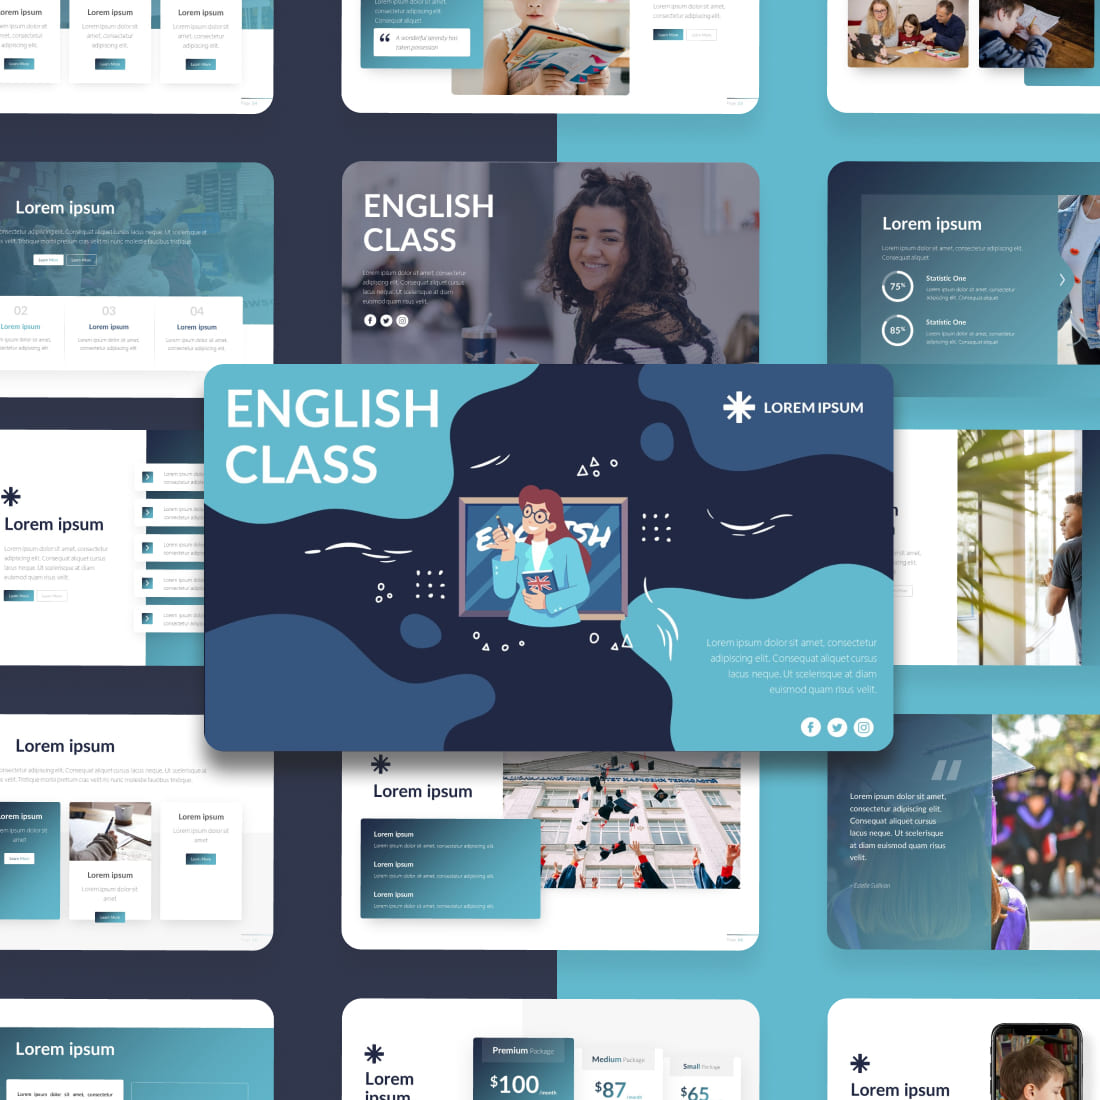 English Class Keynote Template: 50 Slides cover.